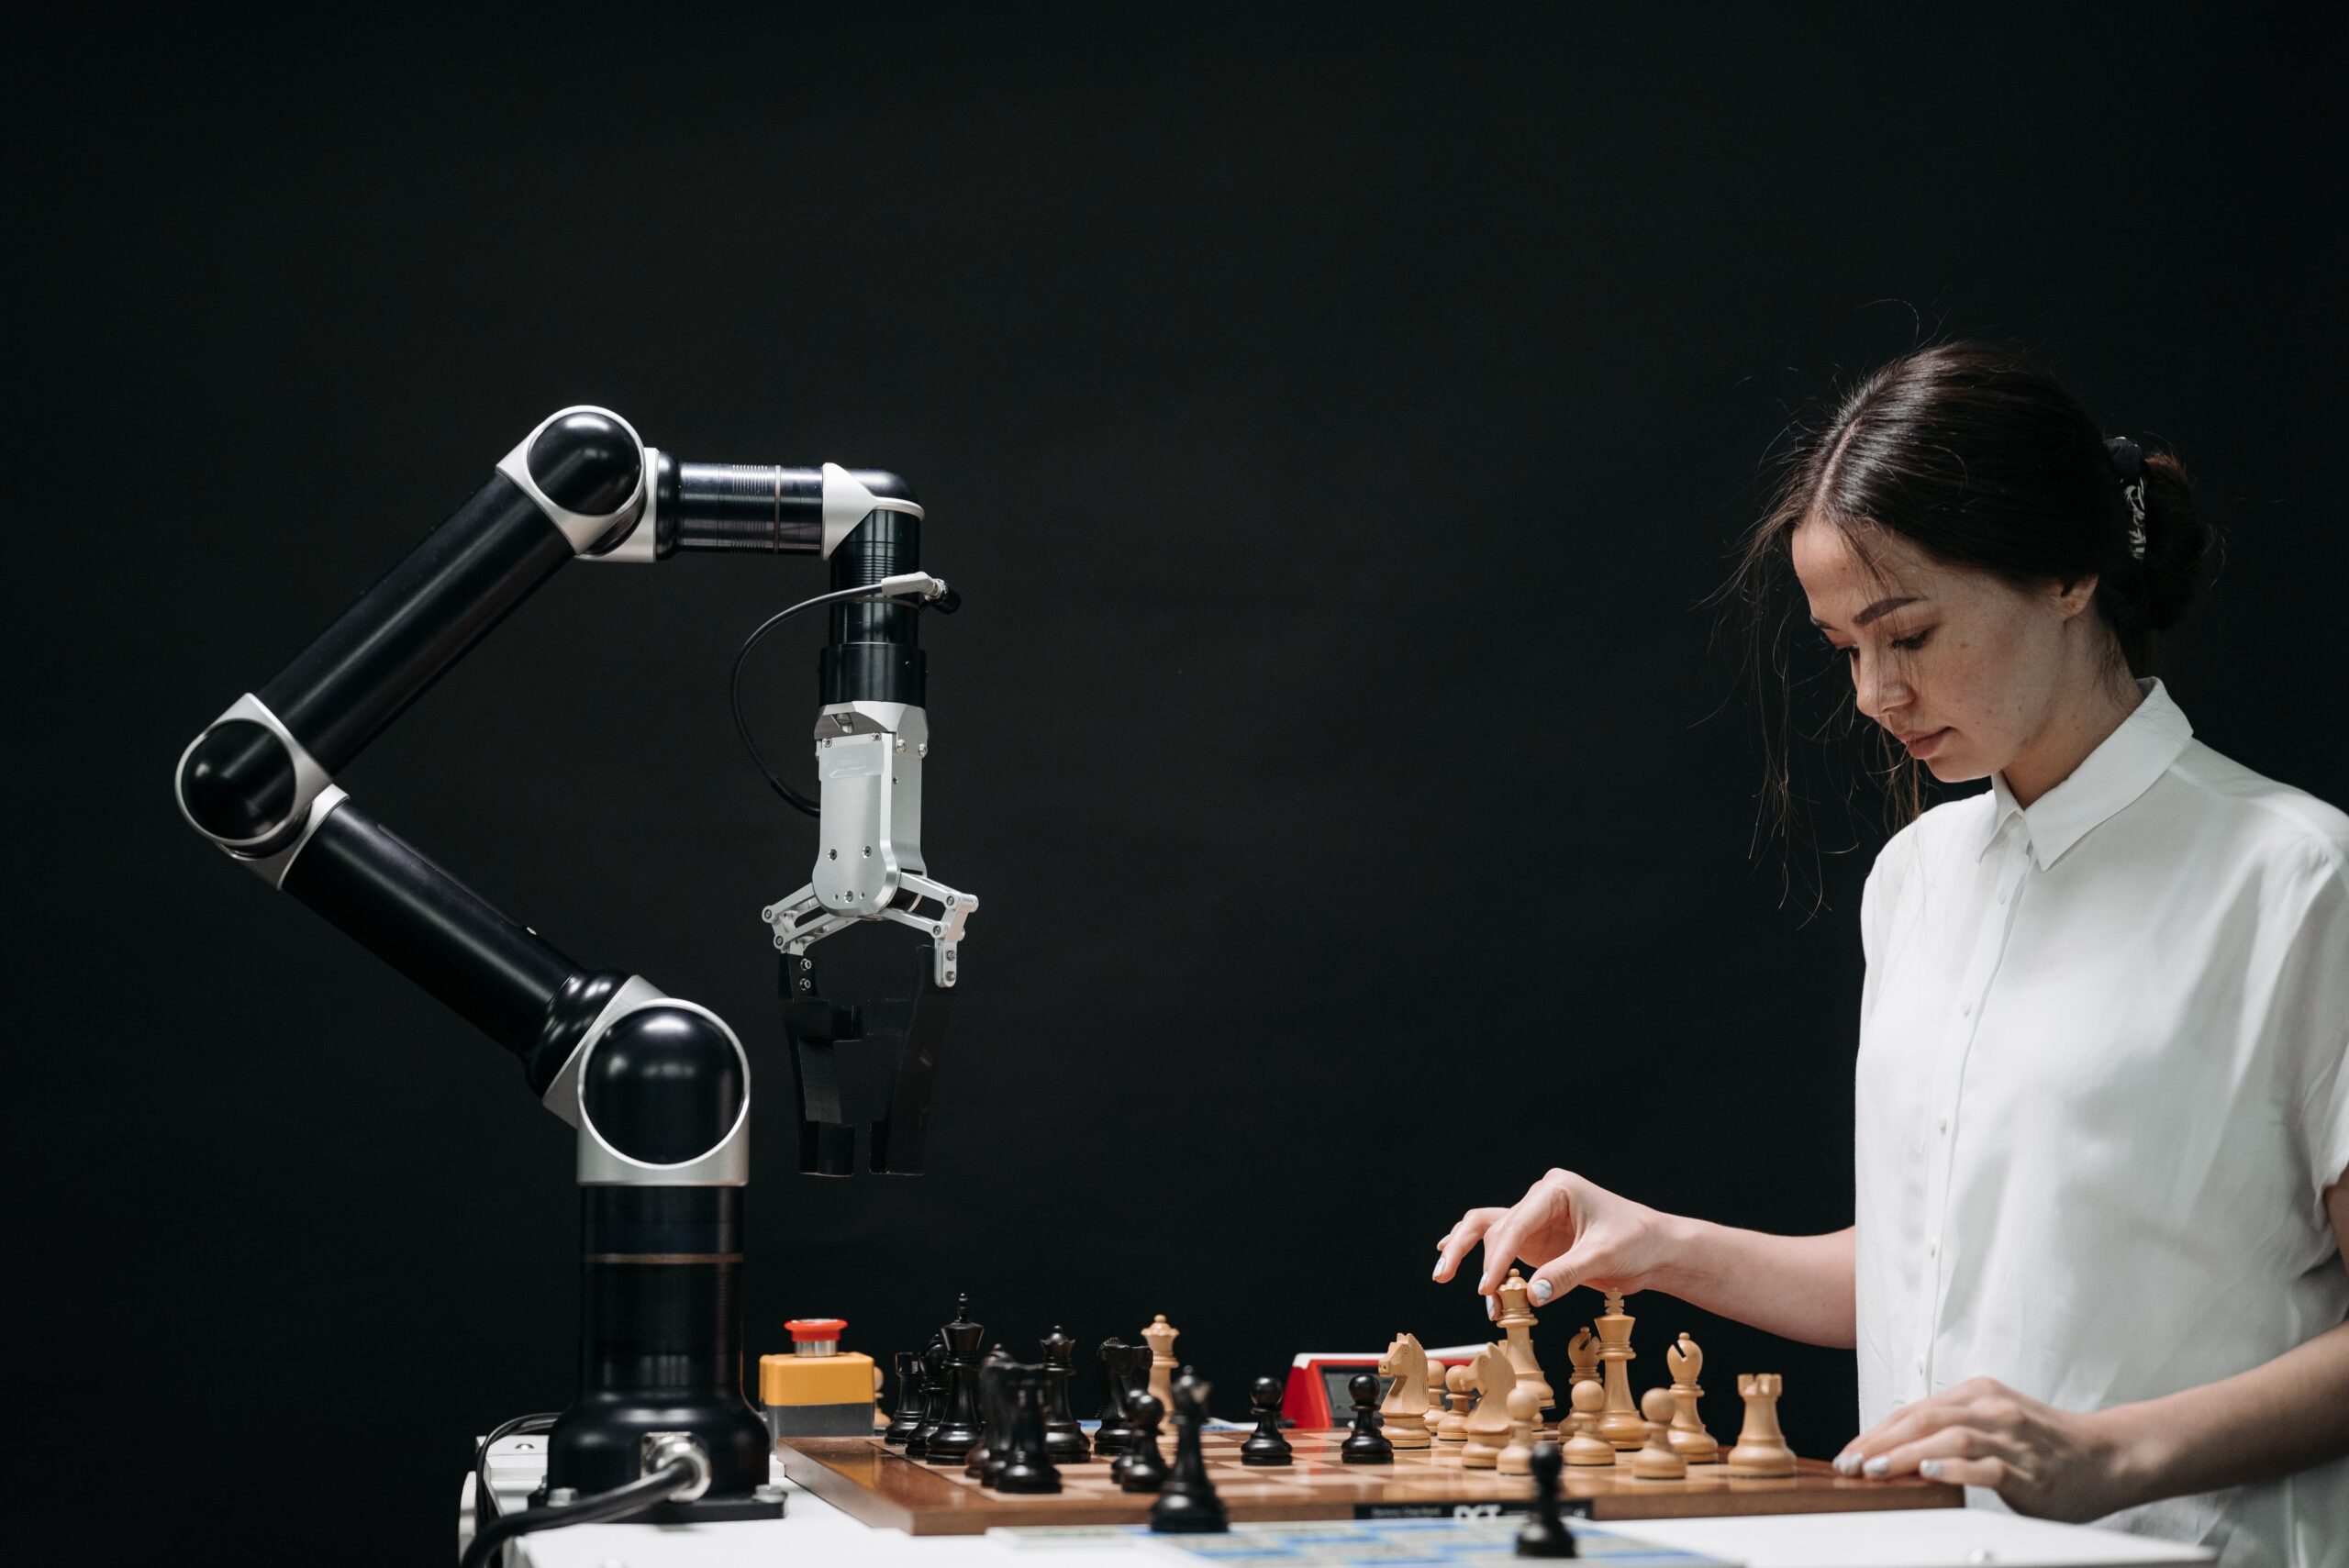 woman in a white shirt playing chess against a robot